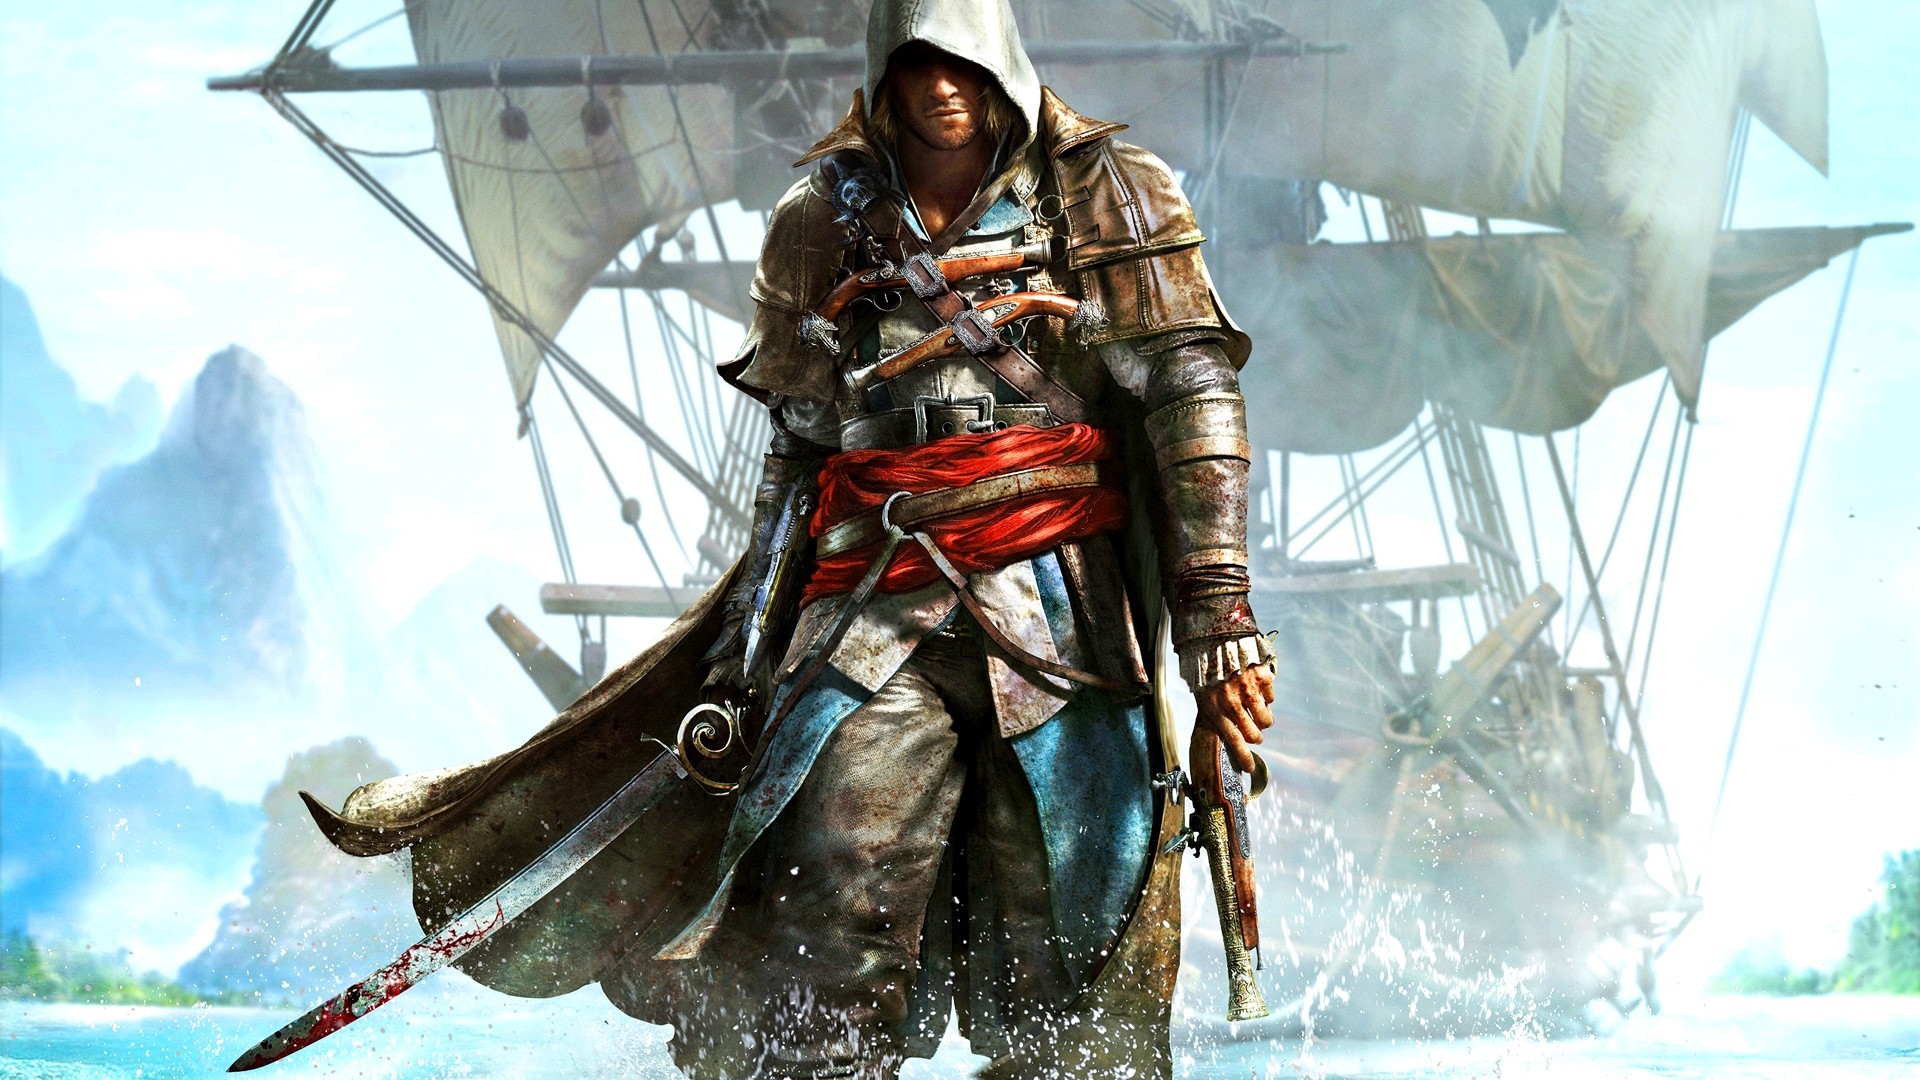 General 1920x1080 Assassin's Creed: Black Flag video games video game art Edward Kenway video game men hoods PC gaming